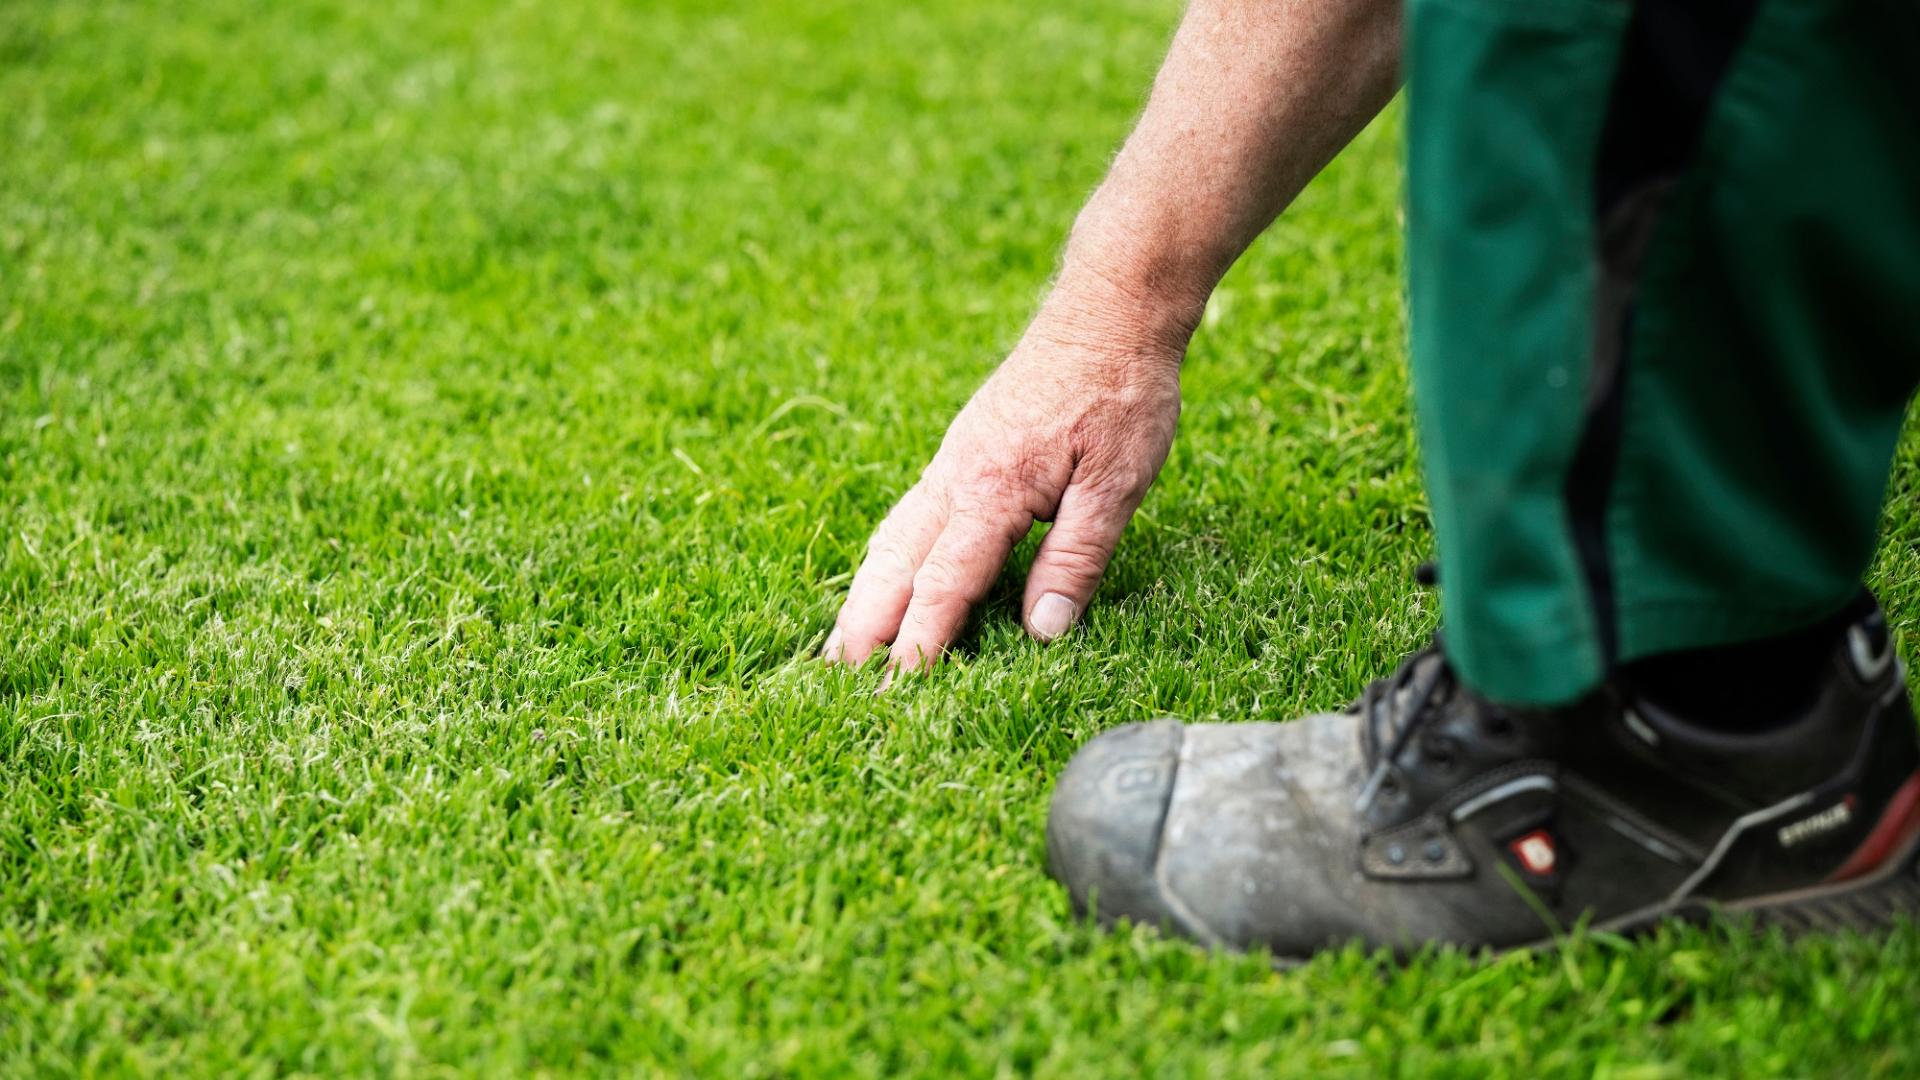 The root to sustainable turf